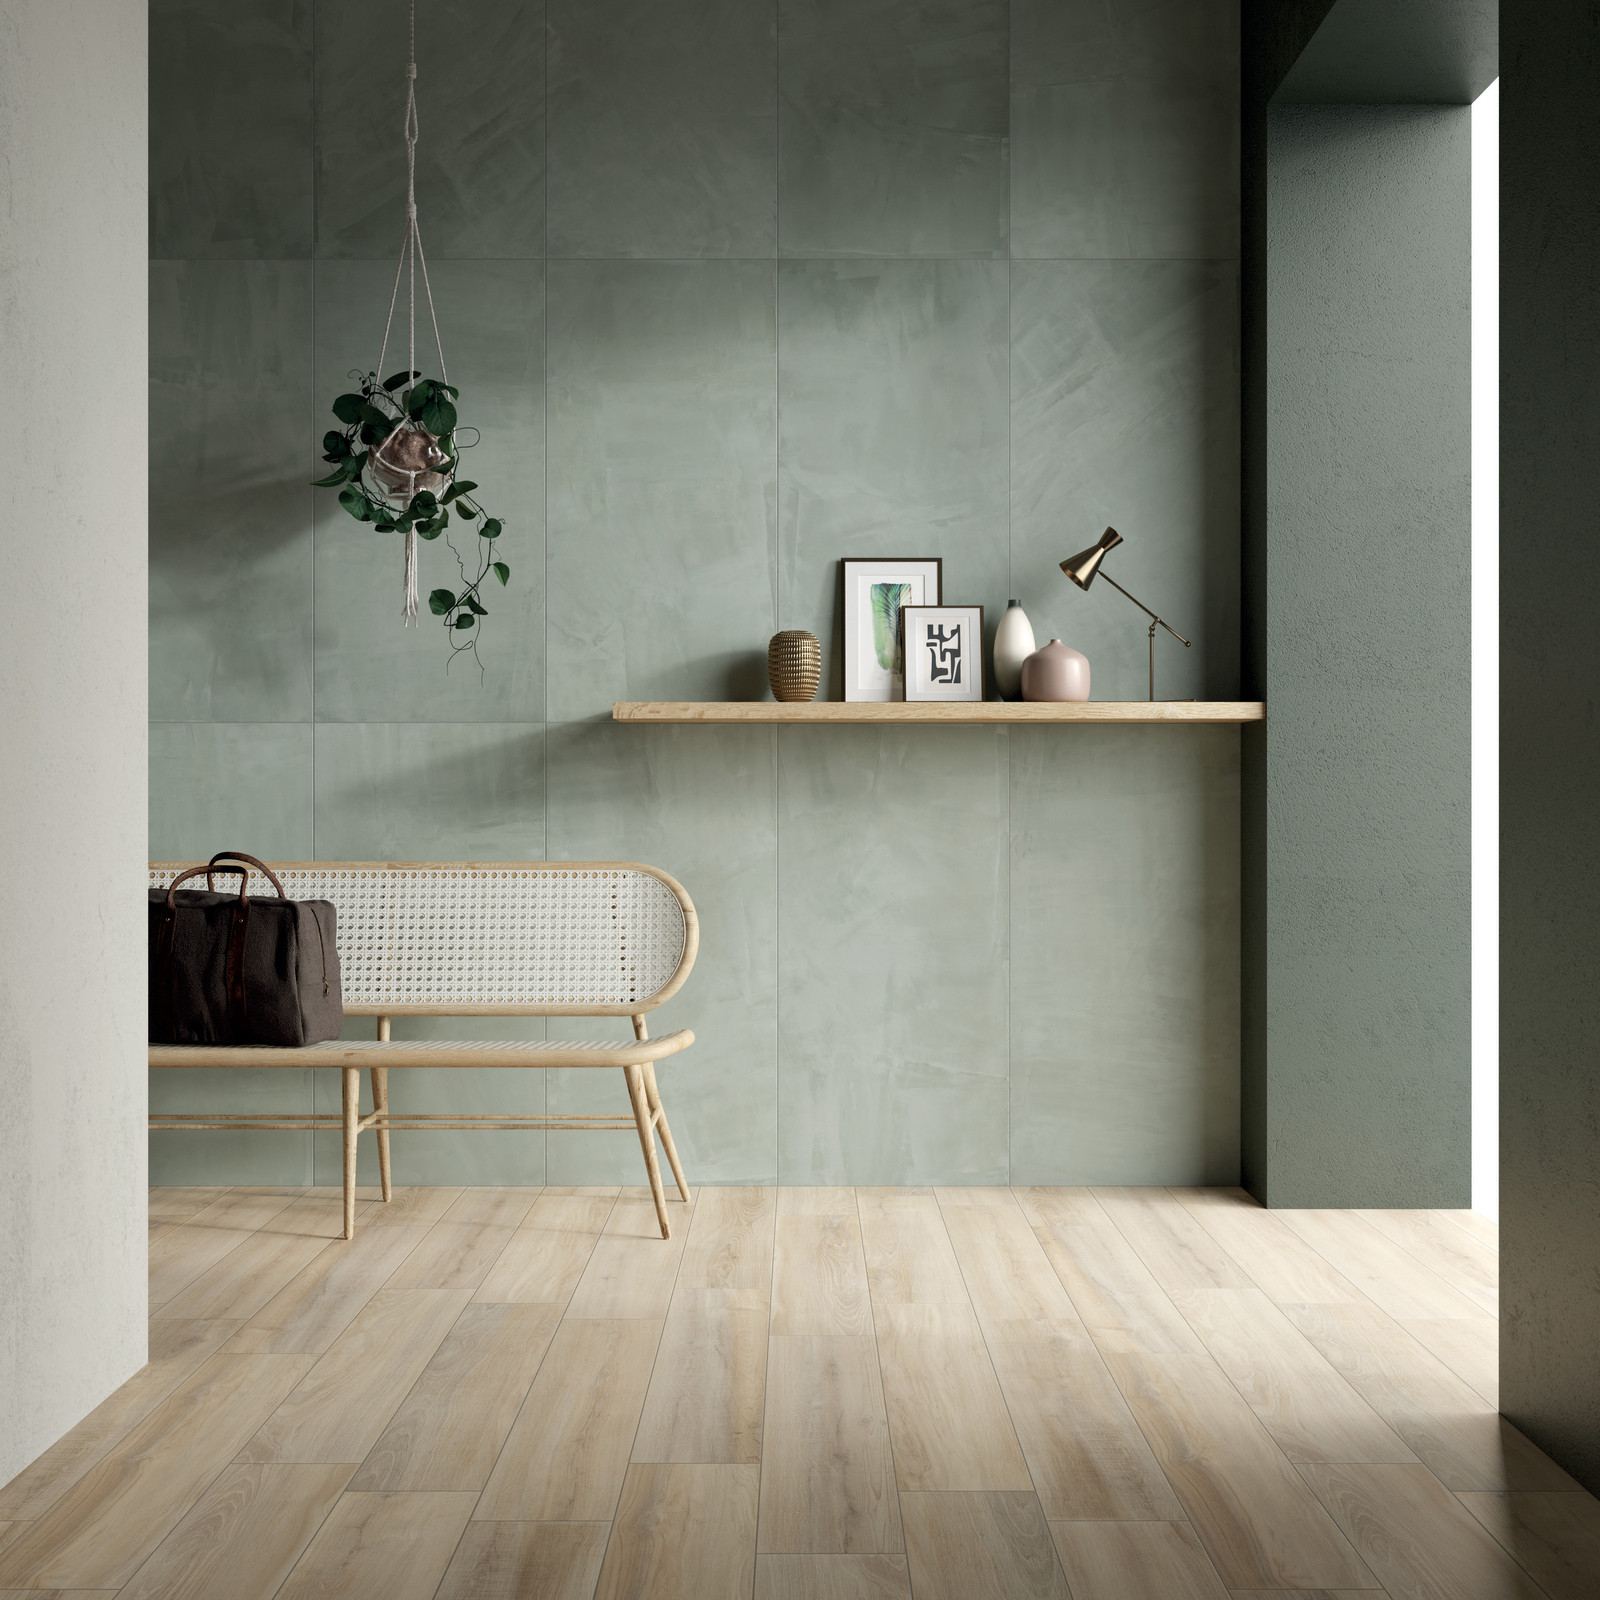 Porcelain tile floor and wall tile Paint Salvia R10 series by Dado Ceramica
